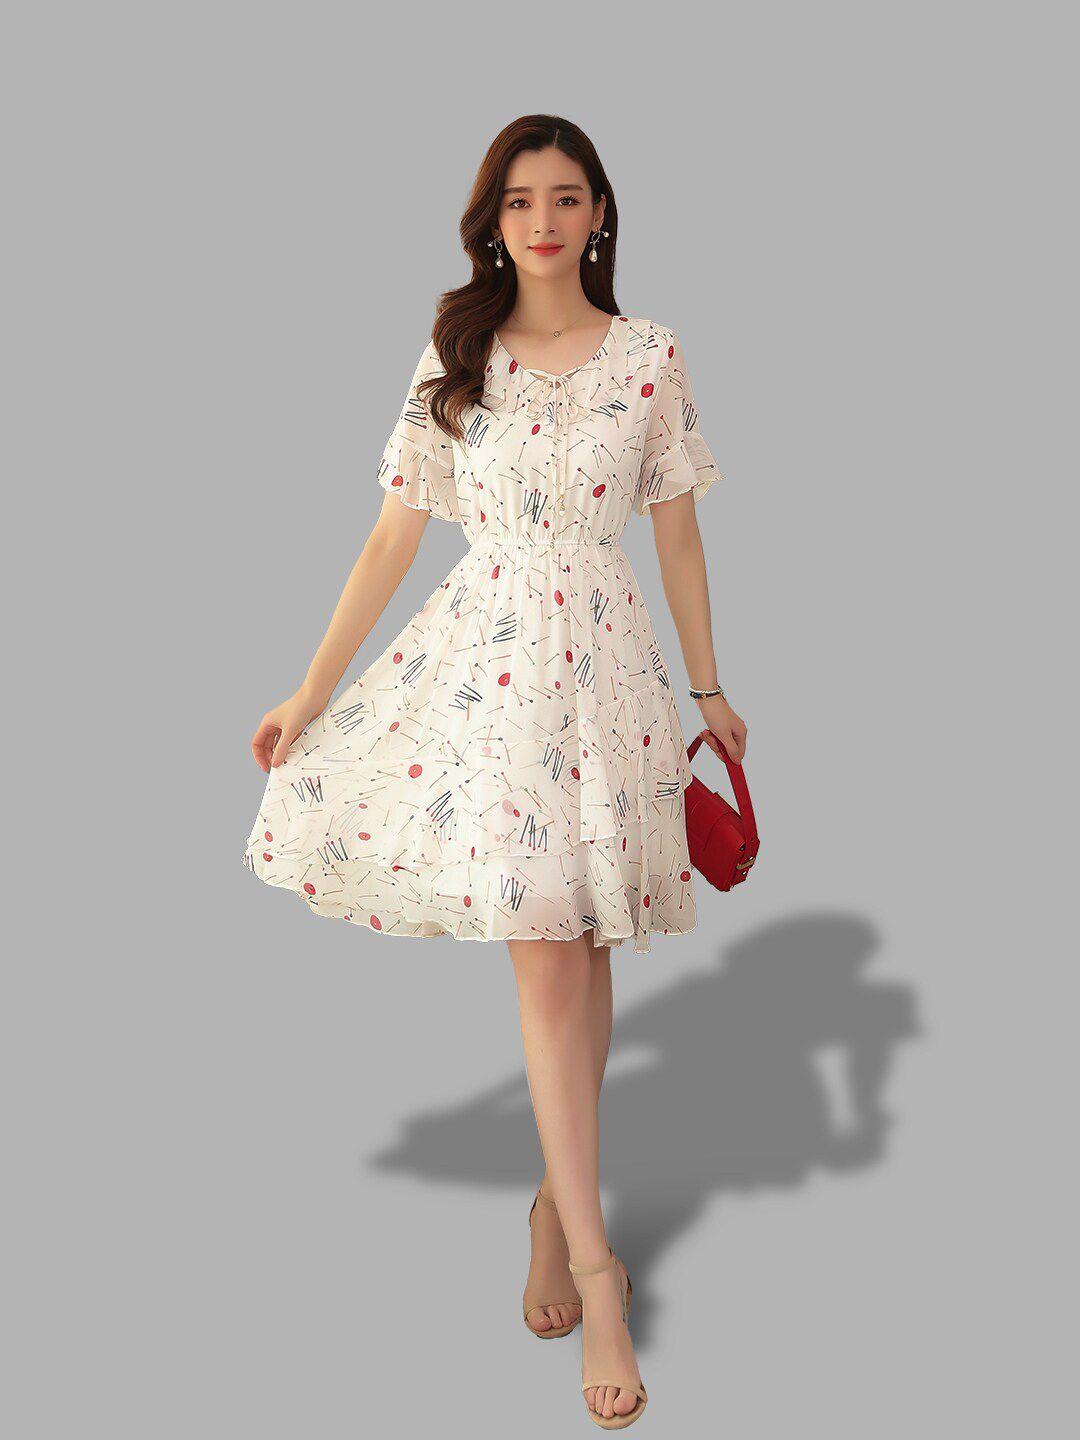 jc-collection-white-floral-dress